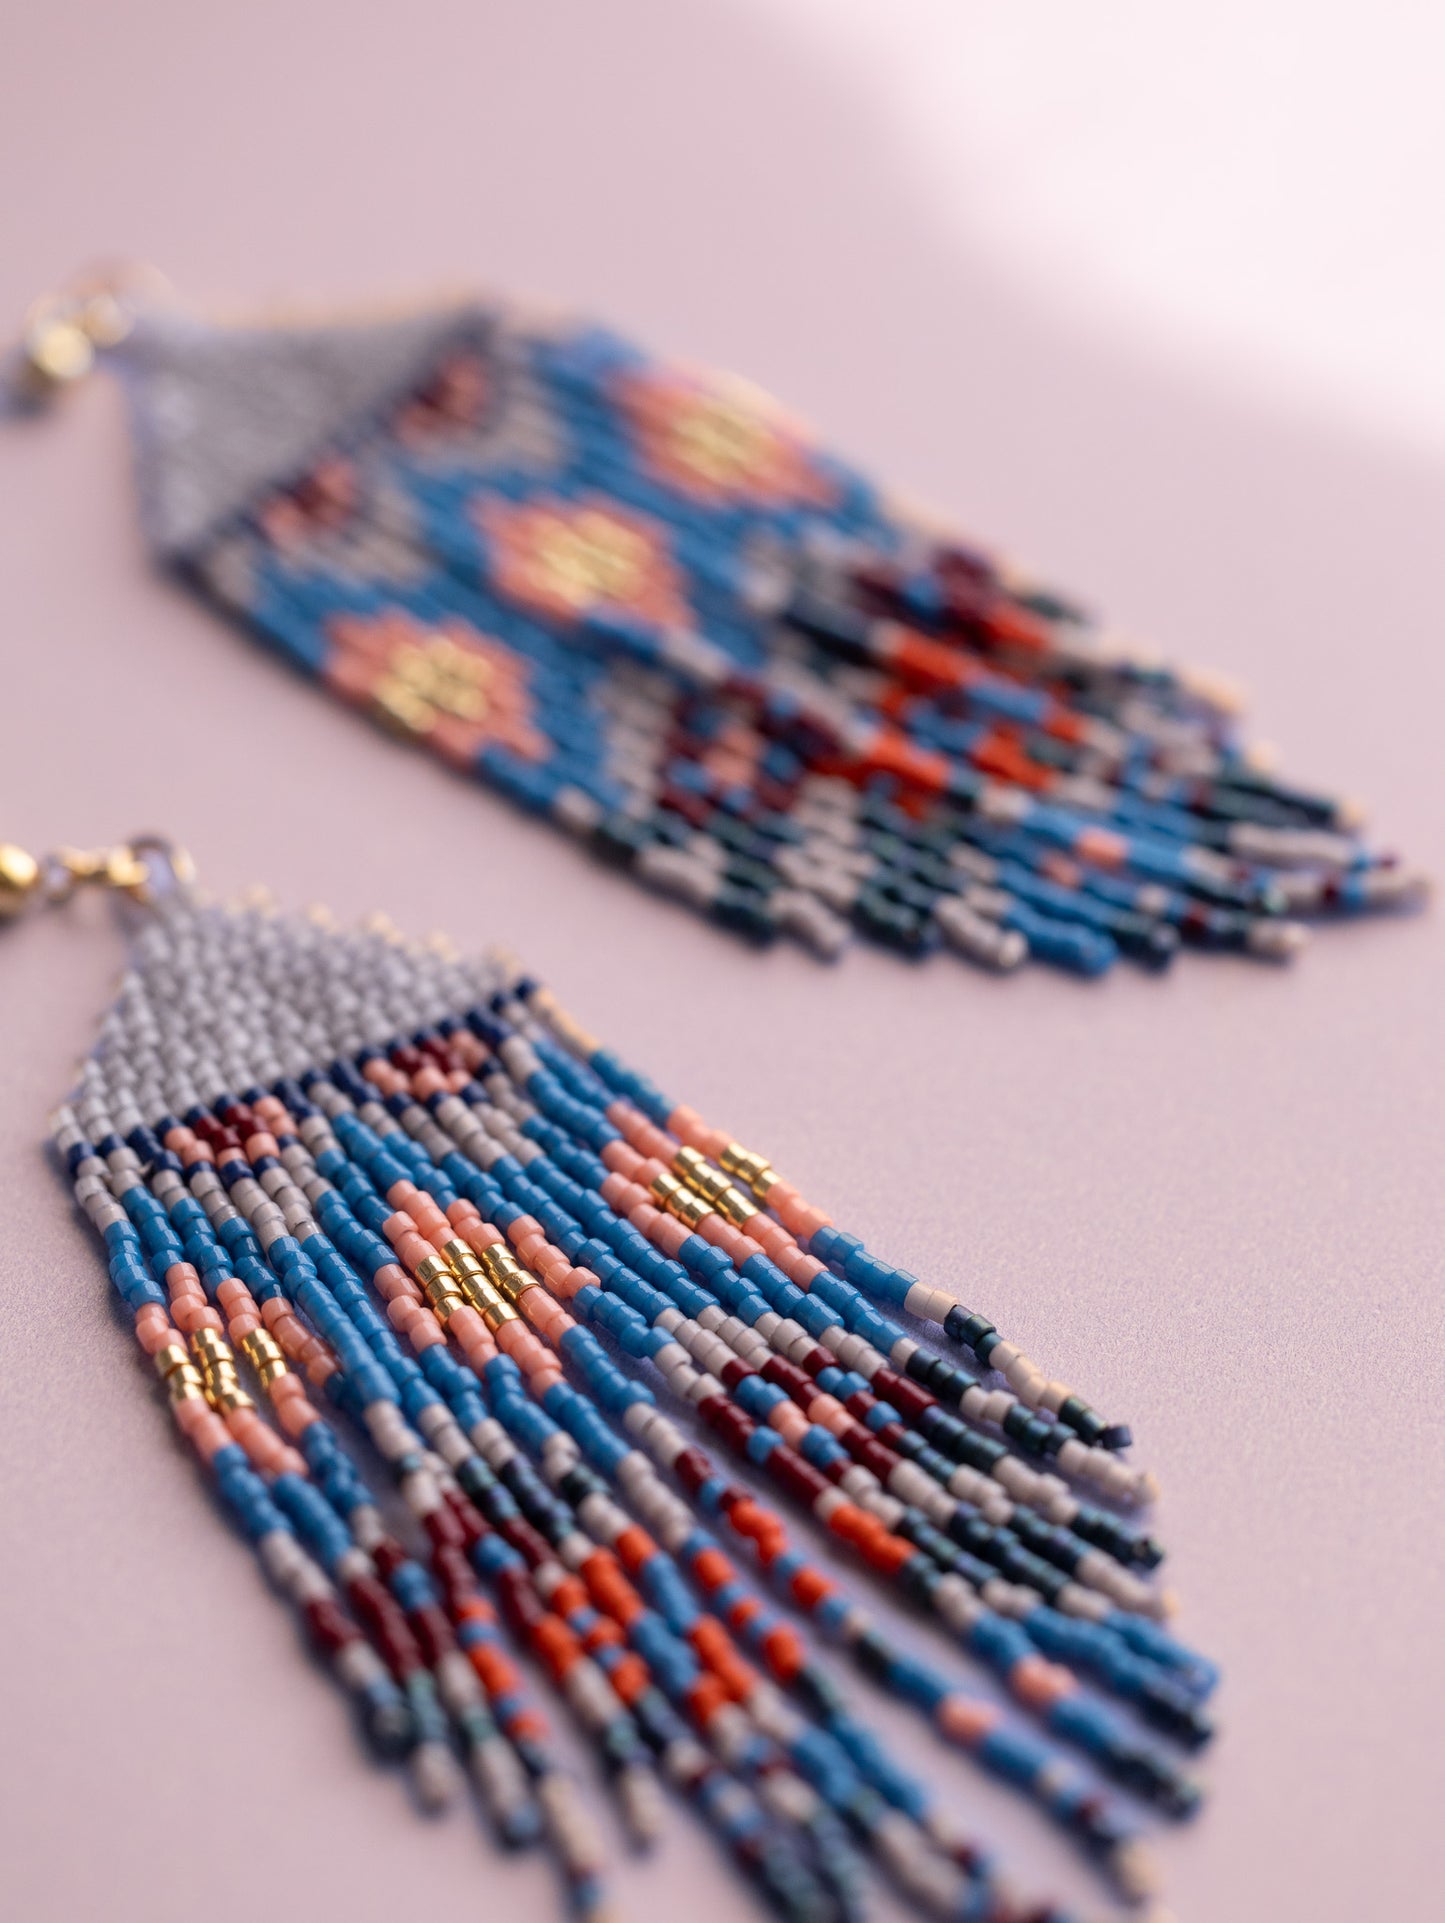 Handwoven beaded stud earrings with blue, pink, gold, red and gray colored beads, close up.